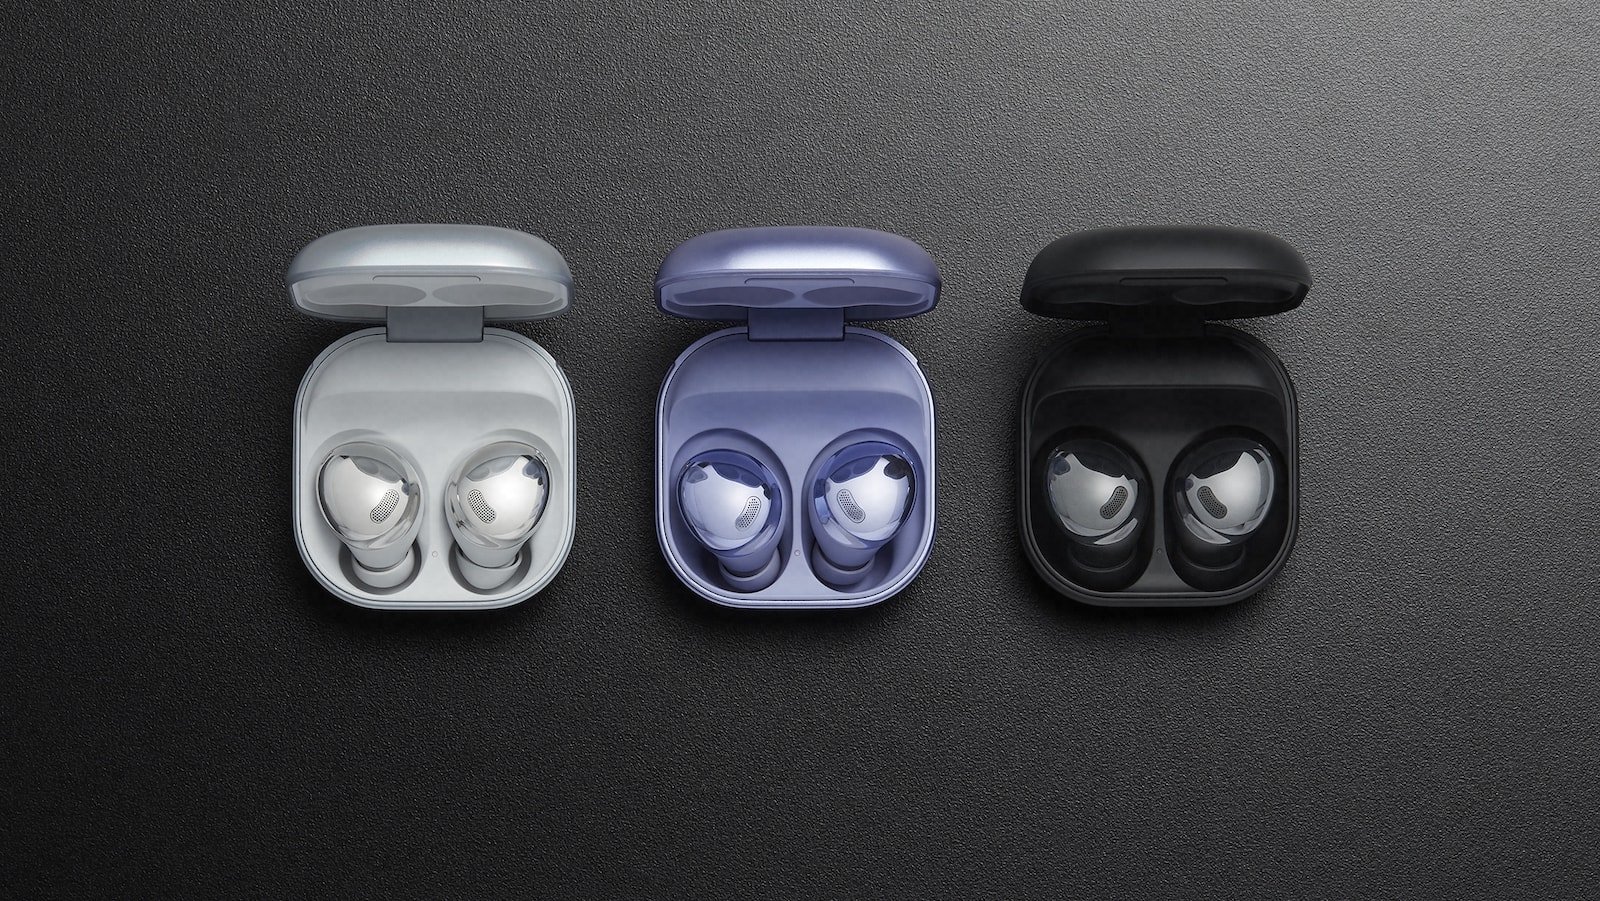 Samsung Galaxy Buds Pro earbuds easily switch audio to the device you’re using